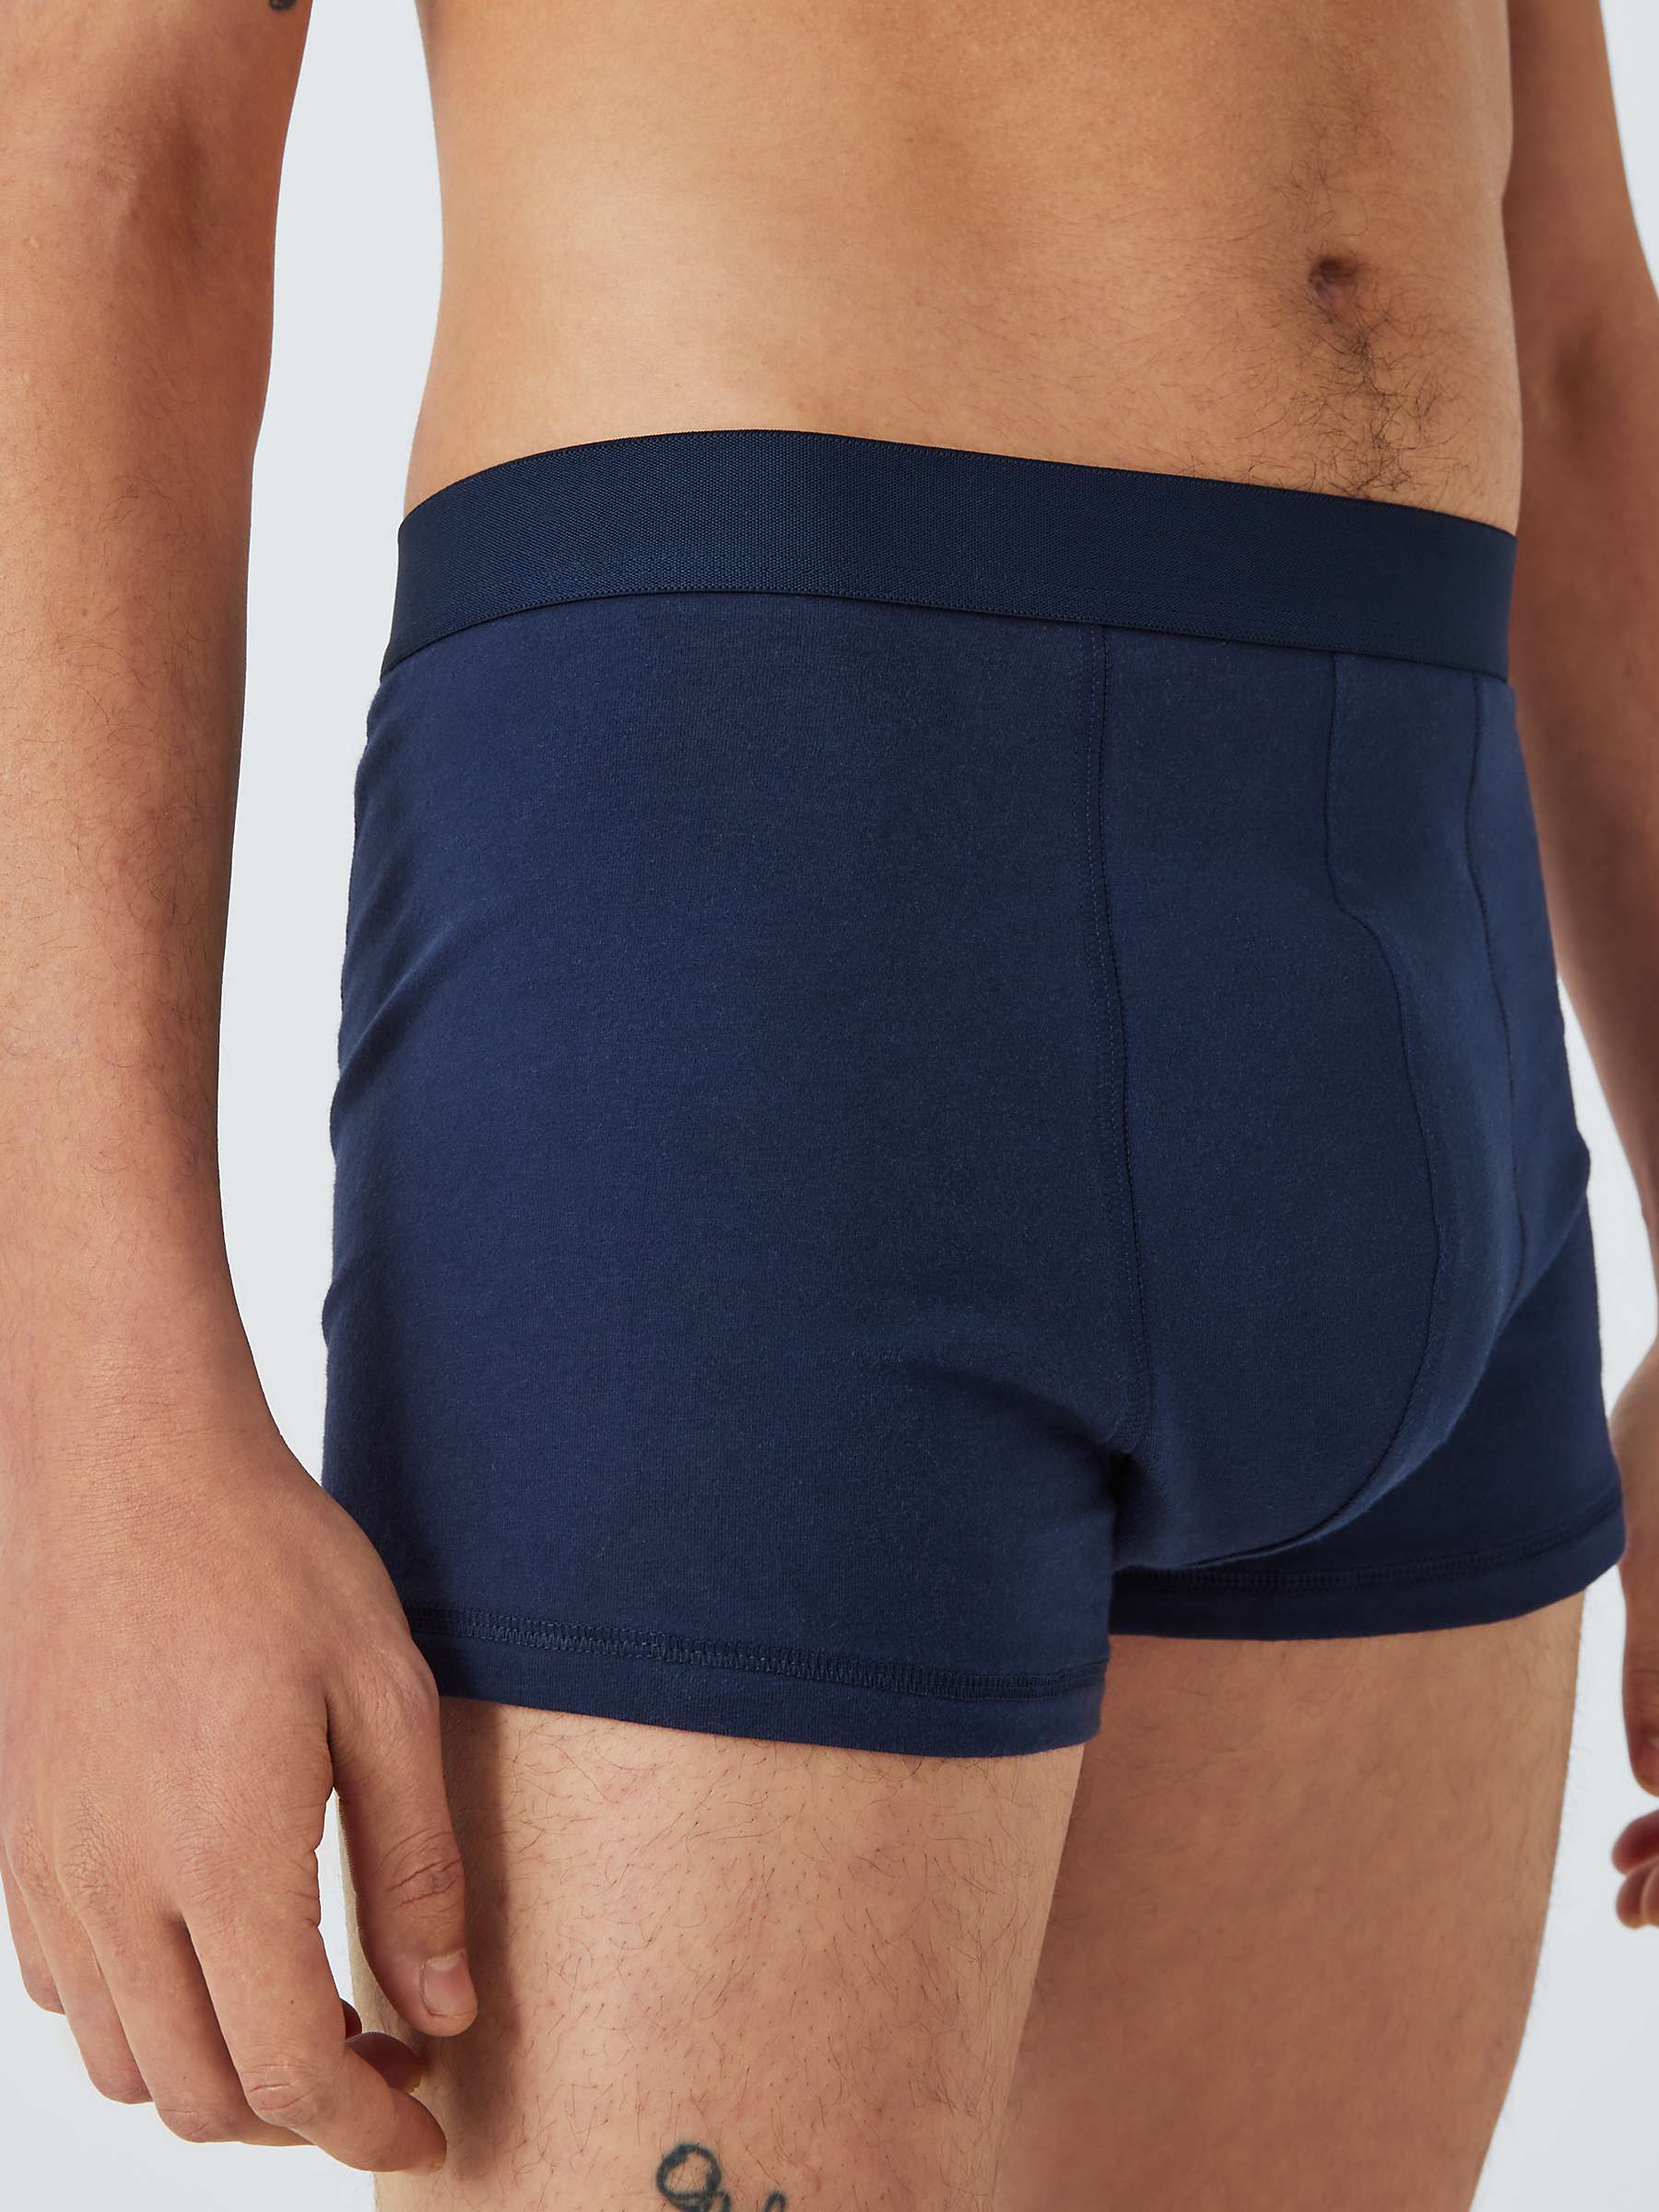 Buy John Lewis ANYDAY Cotton Trunks, Pack of 5, Multi Online at johnlewis.com